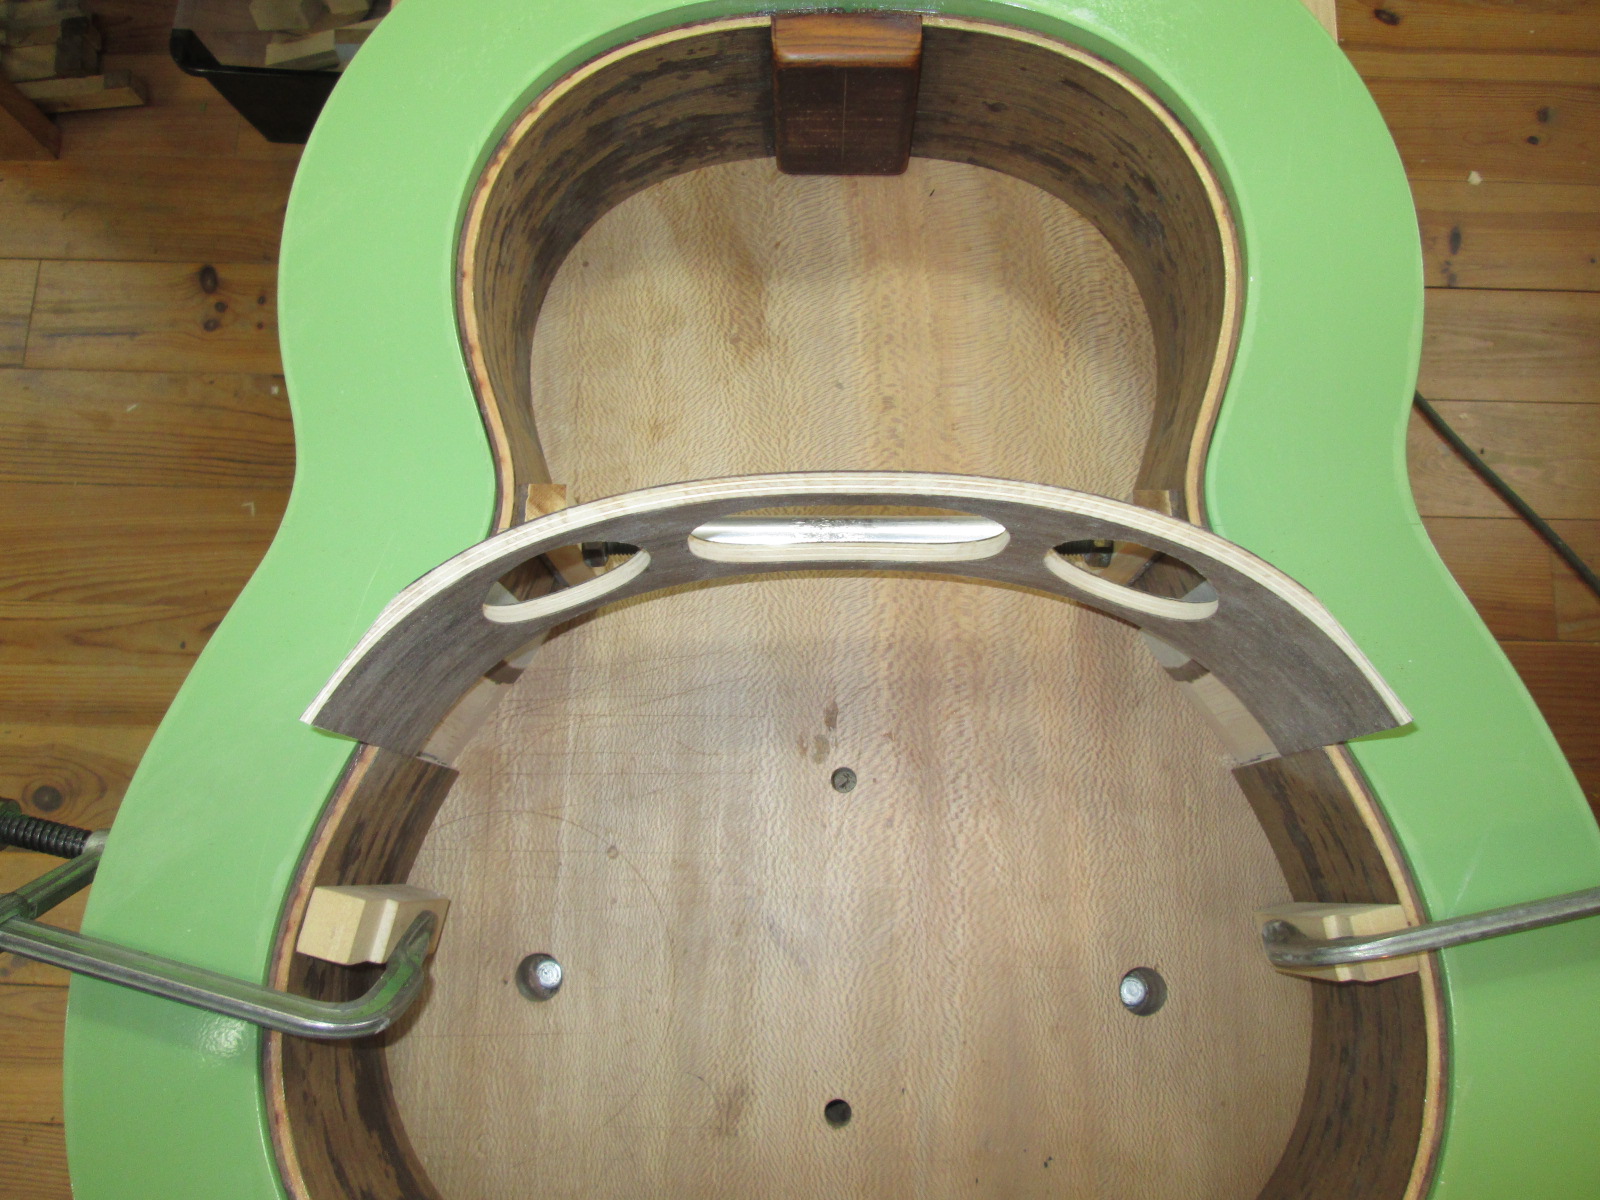 View of the ultra-precise integration step of the diaphragm during the construction of the body of the guitar "La Lenvers".